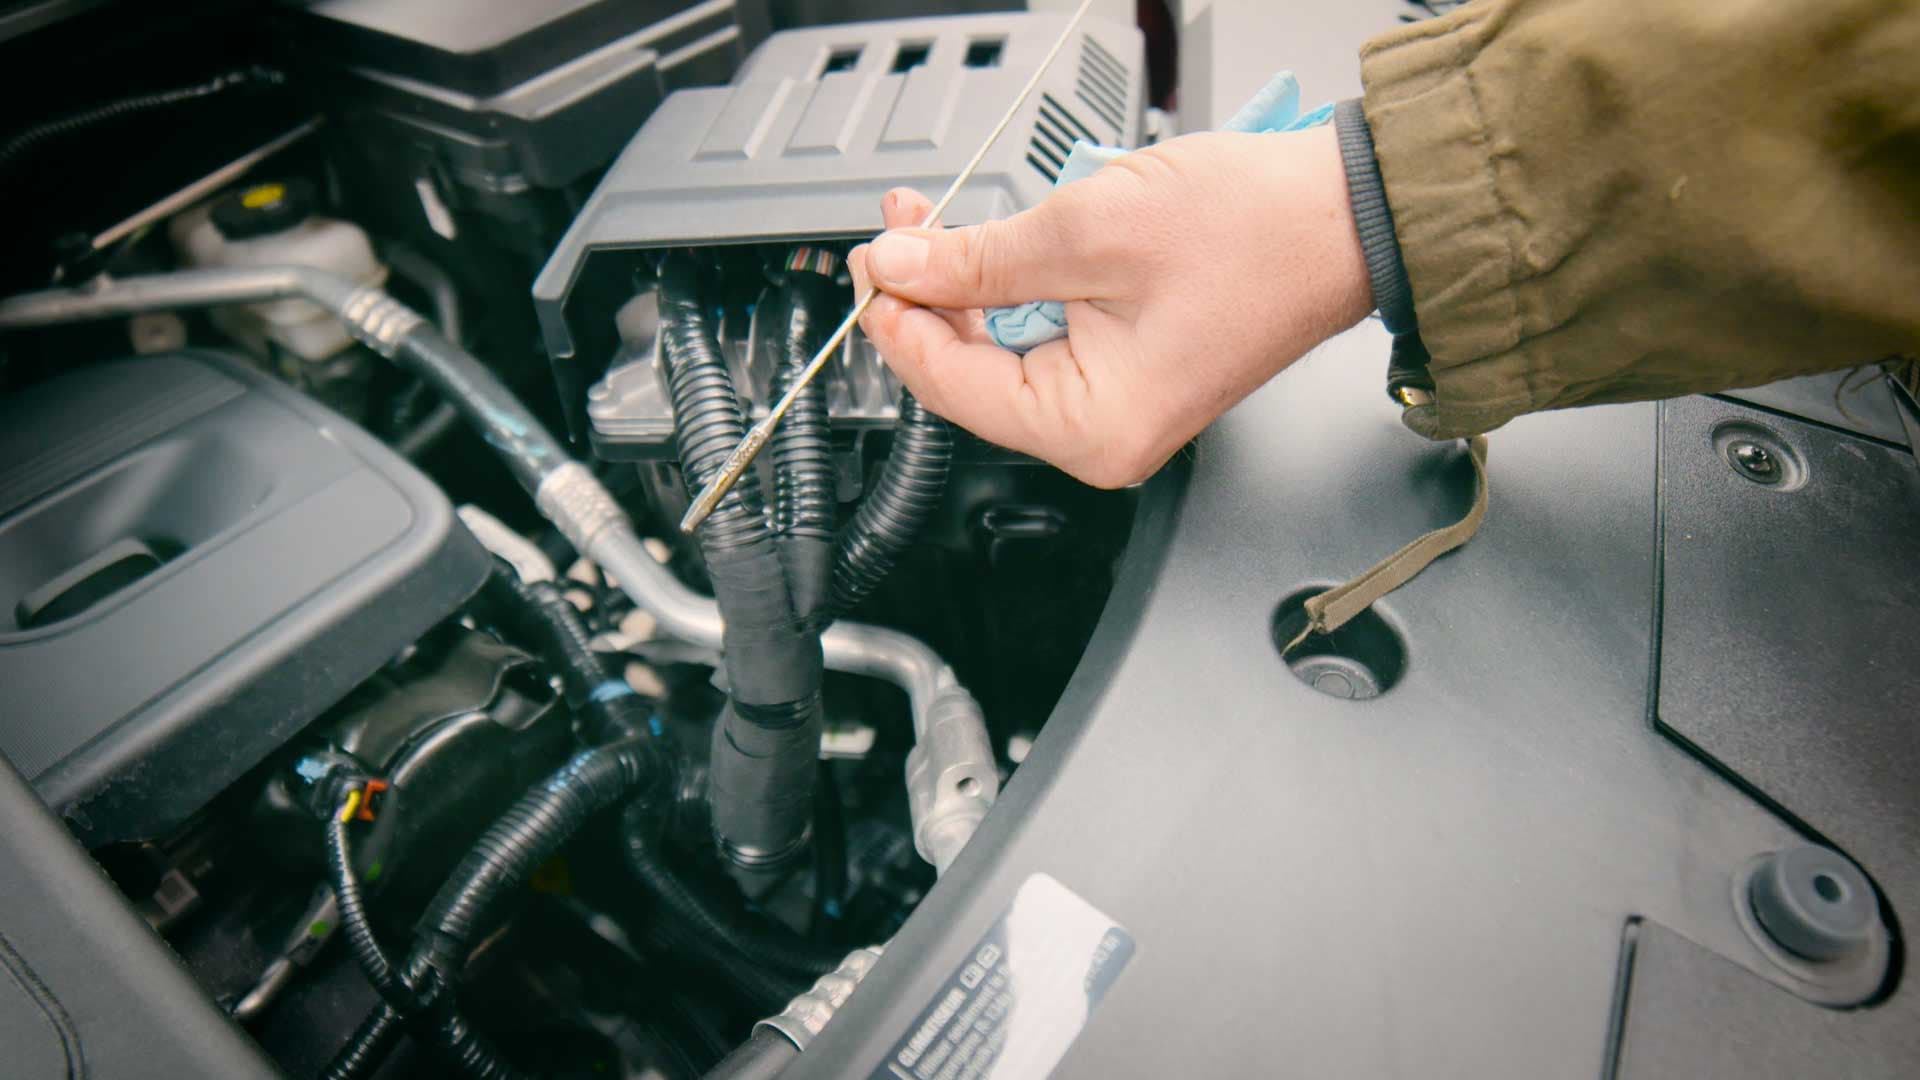 The Build: How to Check Your Oil, Tire Pressure